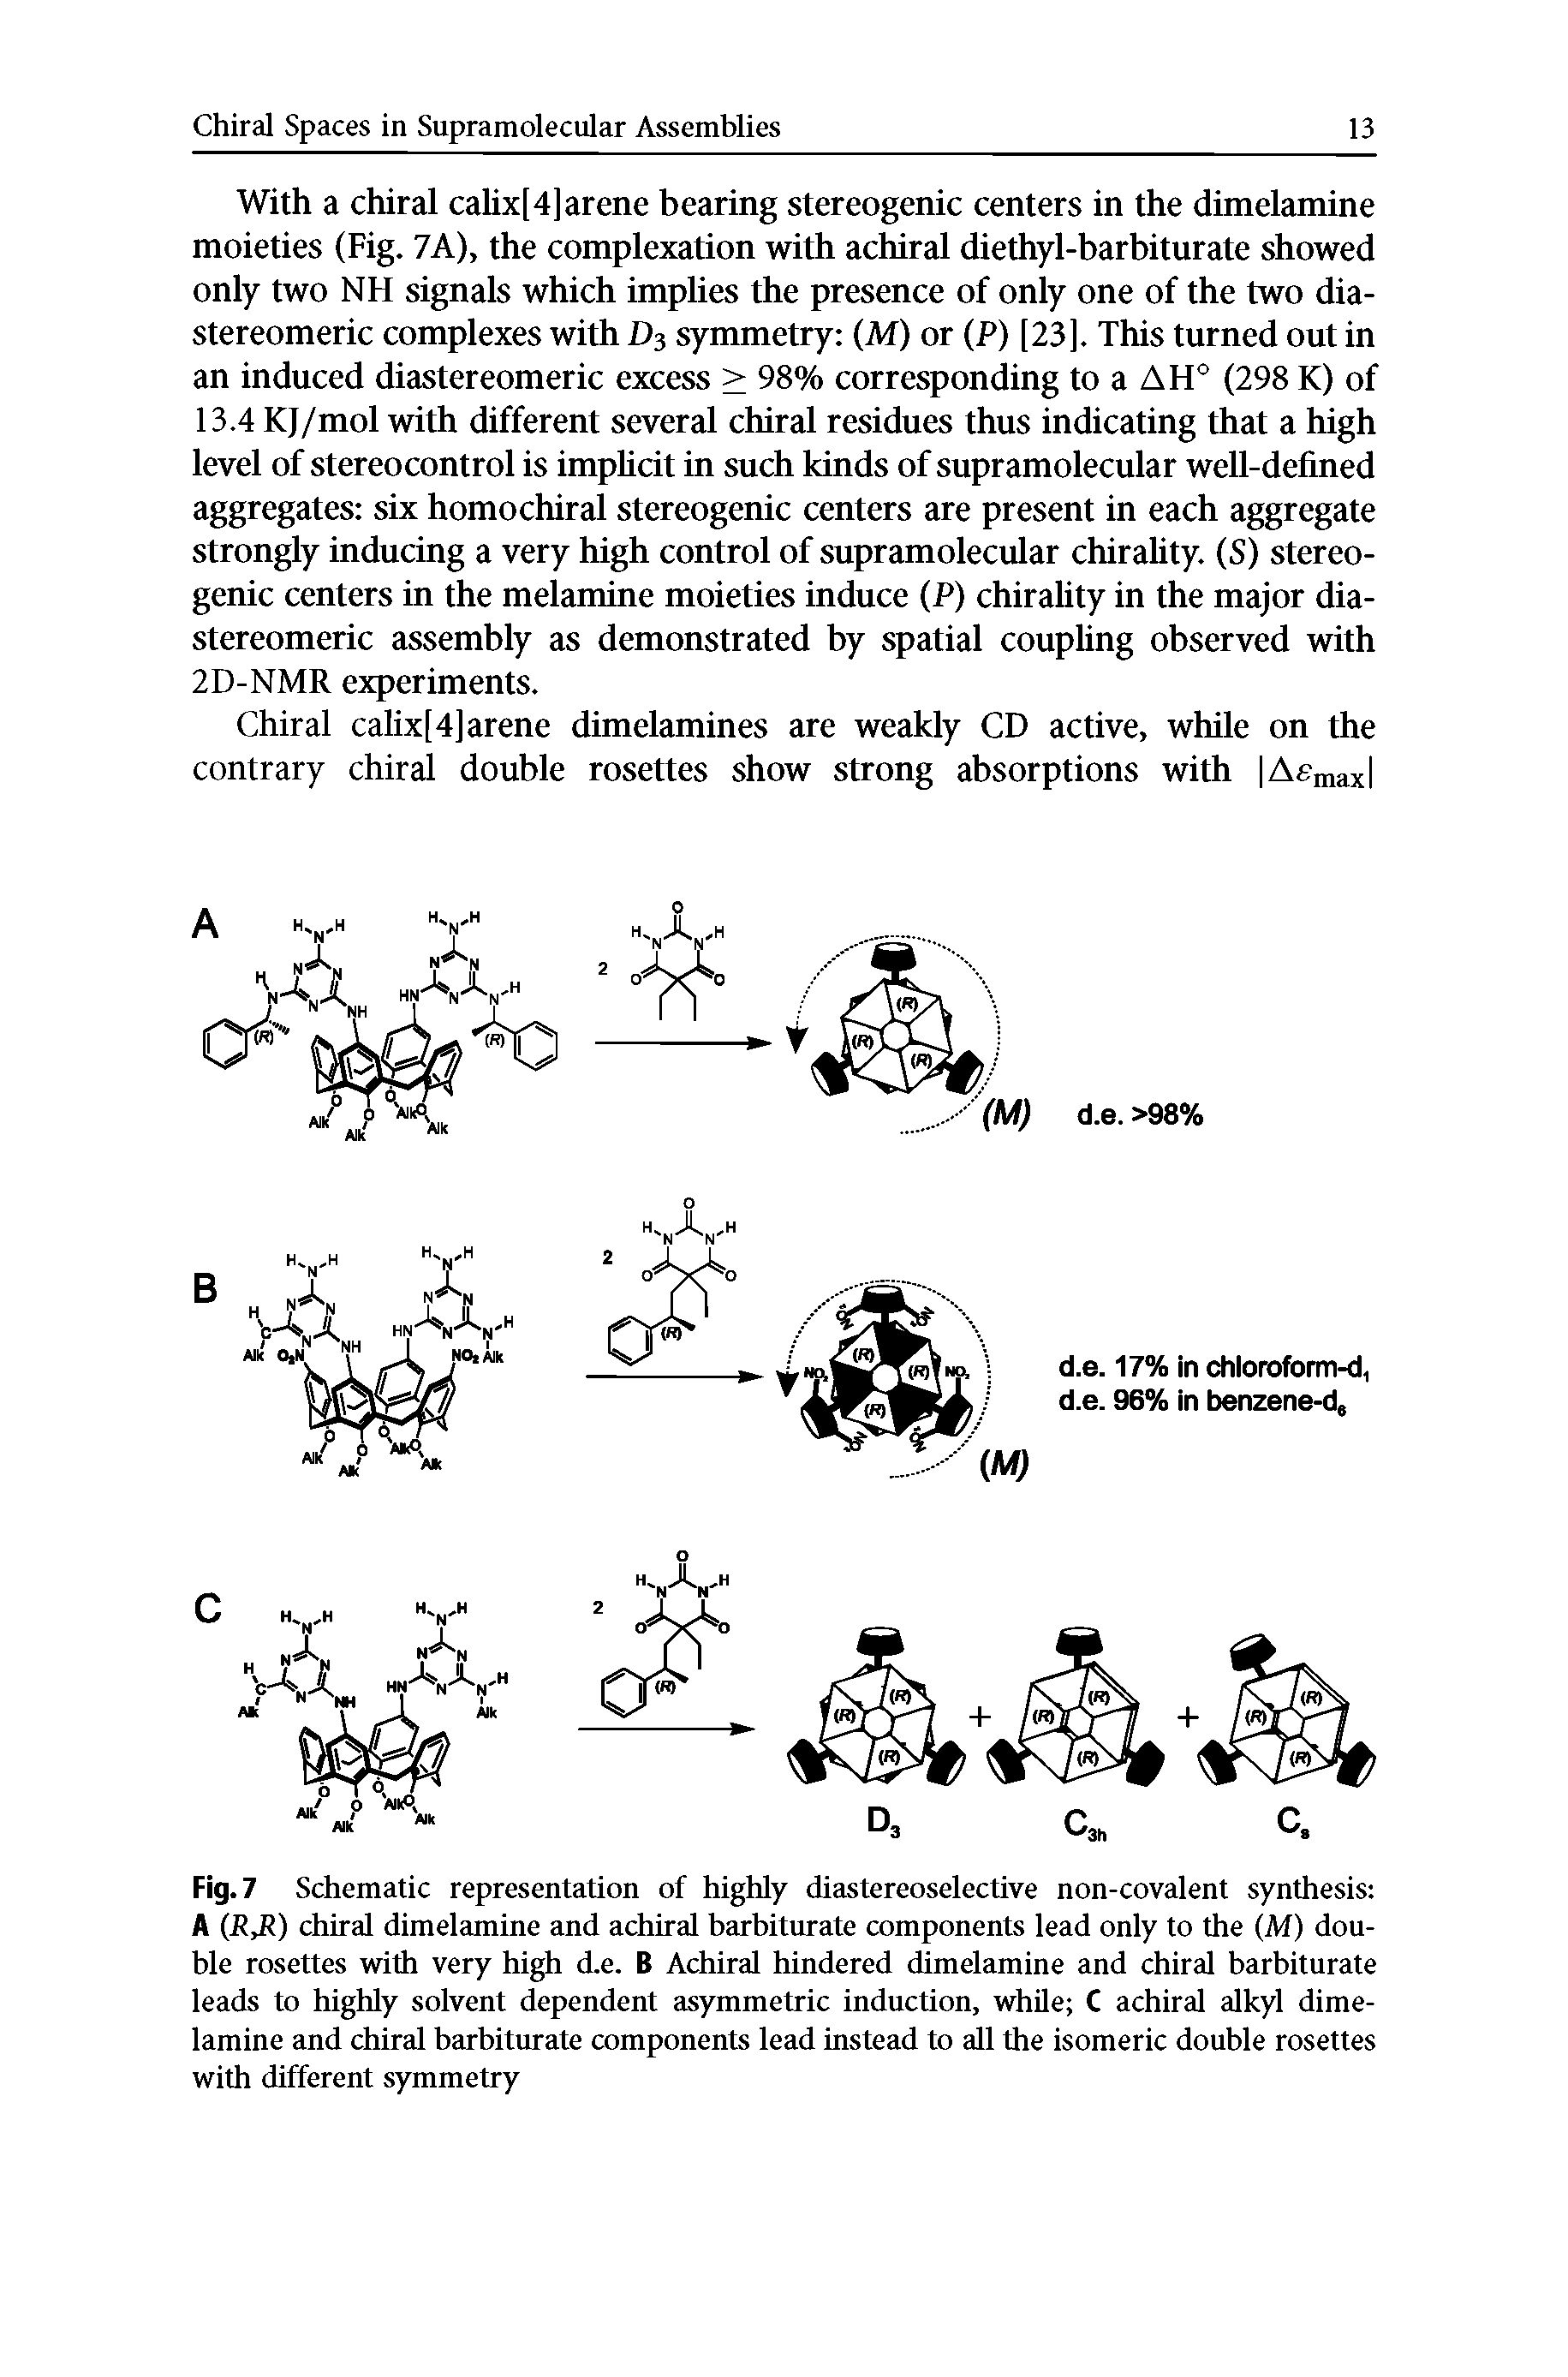 Fig. 7 Schematic representation of highly diastereoselective non-covalent synthesis A (RJt) chiral dimelamine and achiral barbiturate components lead only to the (M) double rosettes with very high d.e. B Achiral hindered dimelamine and chiral barbiturate leads to highly solvent dependent asymmetric induction, while C achiral alkyl dimelamine and chiral barbiturate components lead instead to all the isomeric double rosettes with different symmetry...